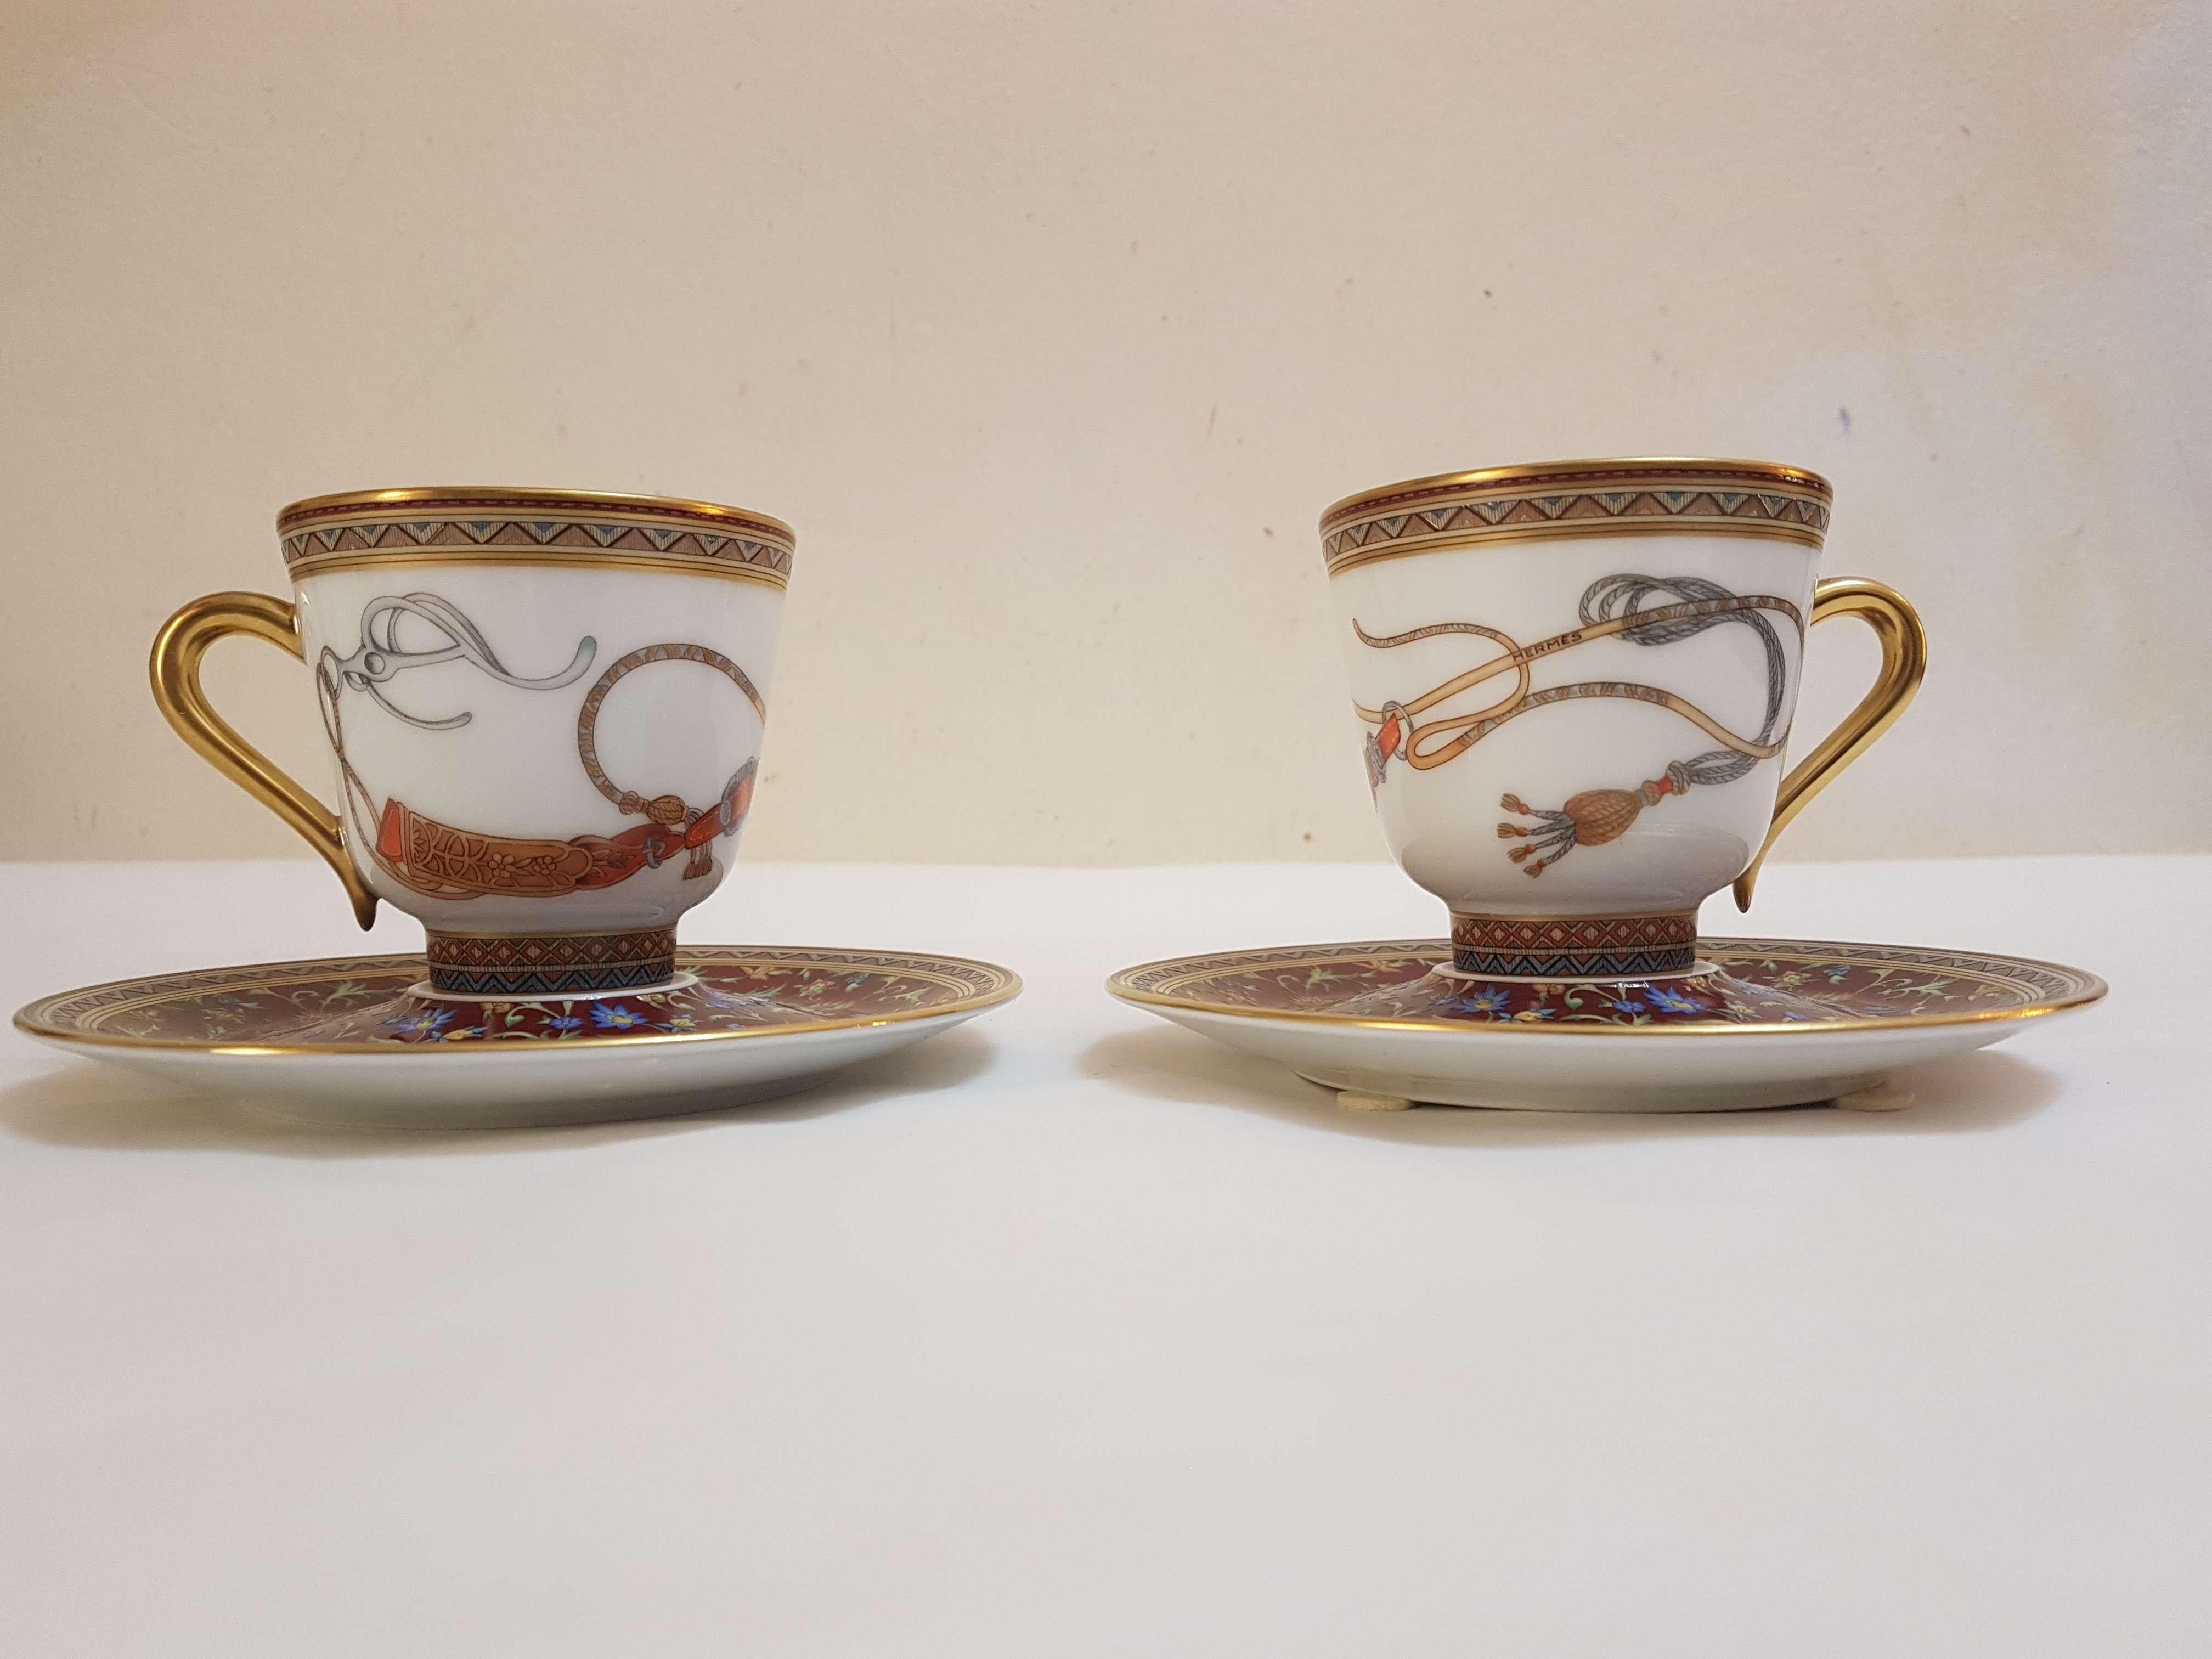 Gorgeous set of two coffee cups and saucers.
Intricate and refined decoration in the style of Persian miniatures, with forms inspired by elements of horse harnesses: Cheval d’Orient recalls the Silk Road caravans and the conviviality of the